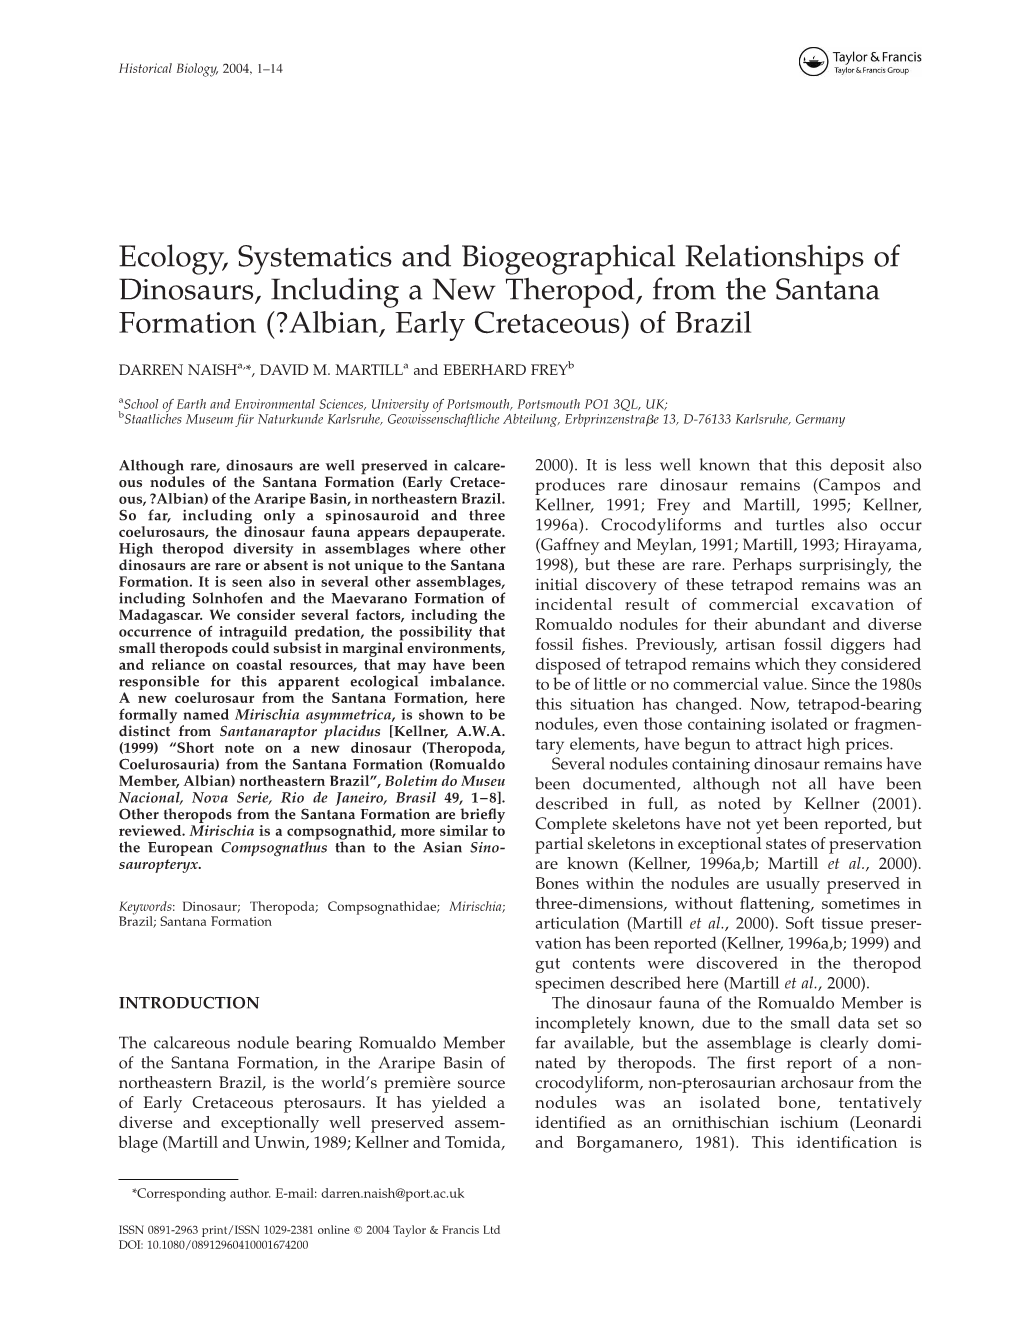 Ecology, Systematics and Biogeographical Relationships of Dinosaurs, Including a New Theropod, from the Santana Formation (?Albian, Early Cretaceous) of Brazil